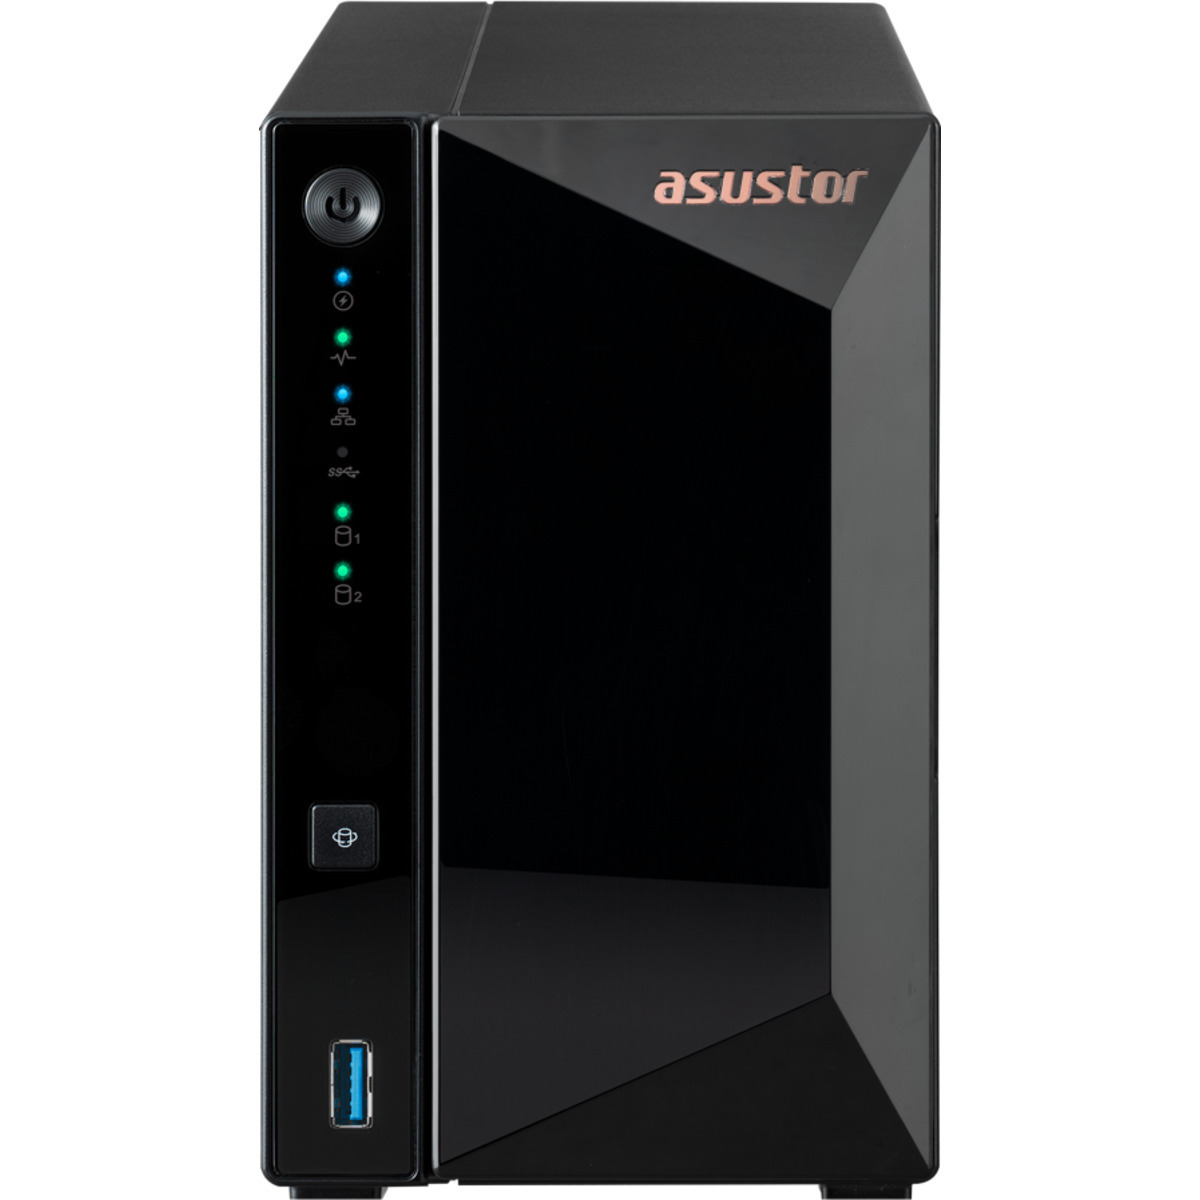 ASUSTOR DRIVESTOR 2 Pro AS3302T 48tb 2-Bay Desktop Personal / Basic Home / Small Office NAS - Network Attached Storage Device 2x24tb Western Digital Ultrastar HC580 WUH722424ALE6L4 3.5 7200rpm SATA 6Gb/s HDD ENTERPRISE Class Drives Installed - Burn-In Tested DRIVESTOR 2 Pro AS3302T